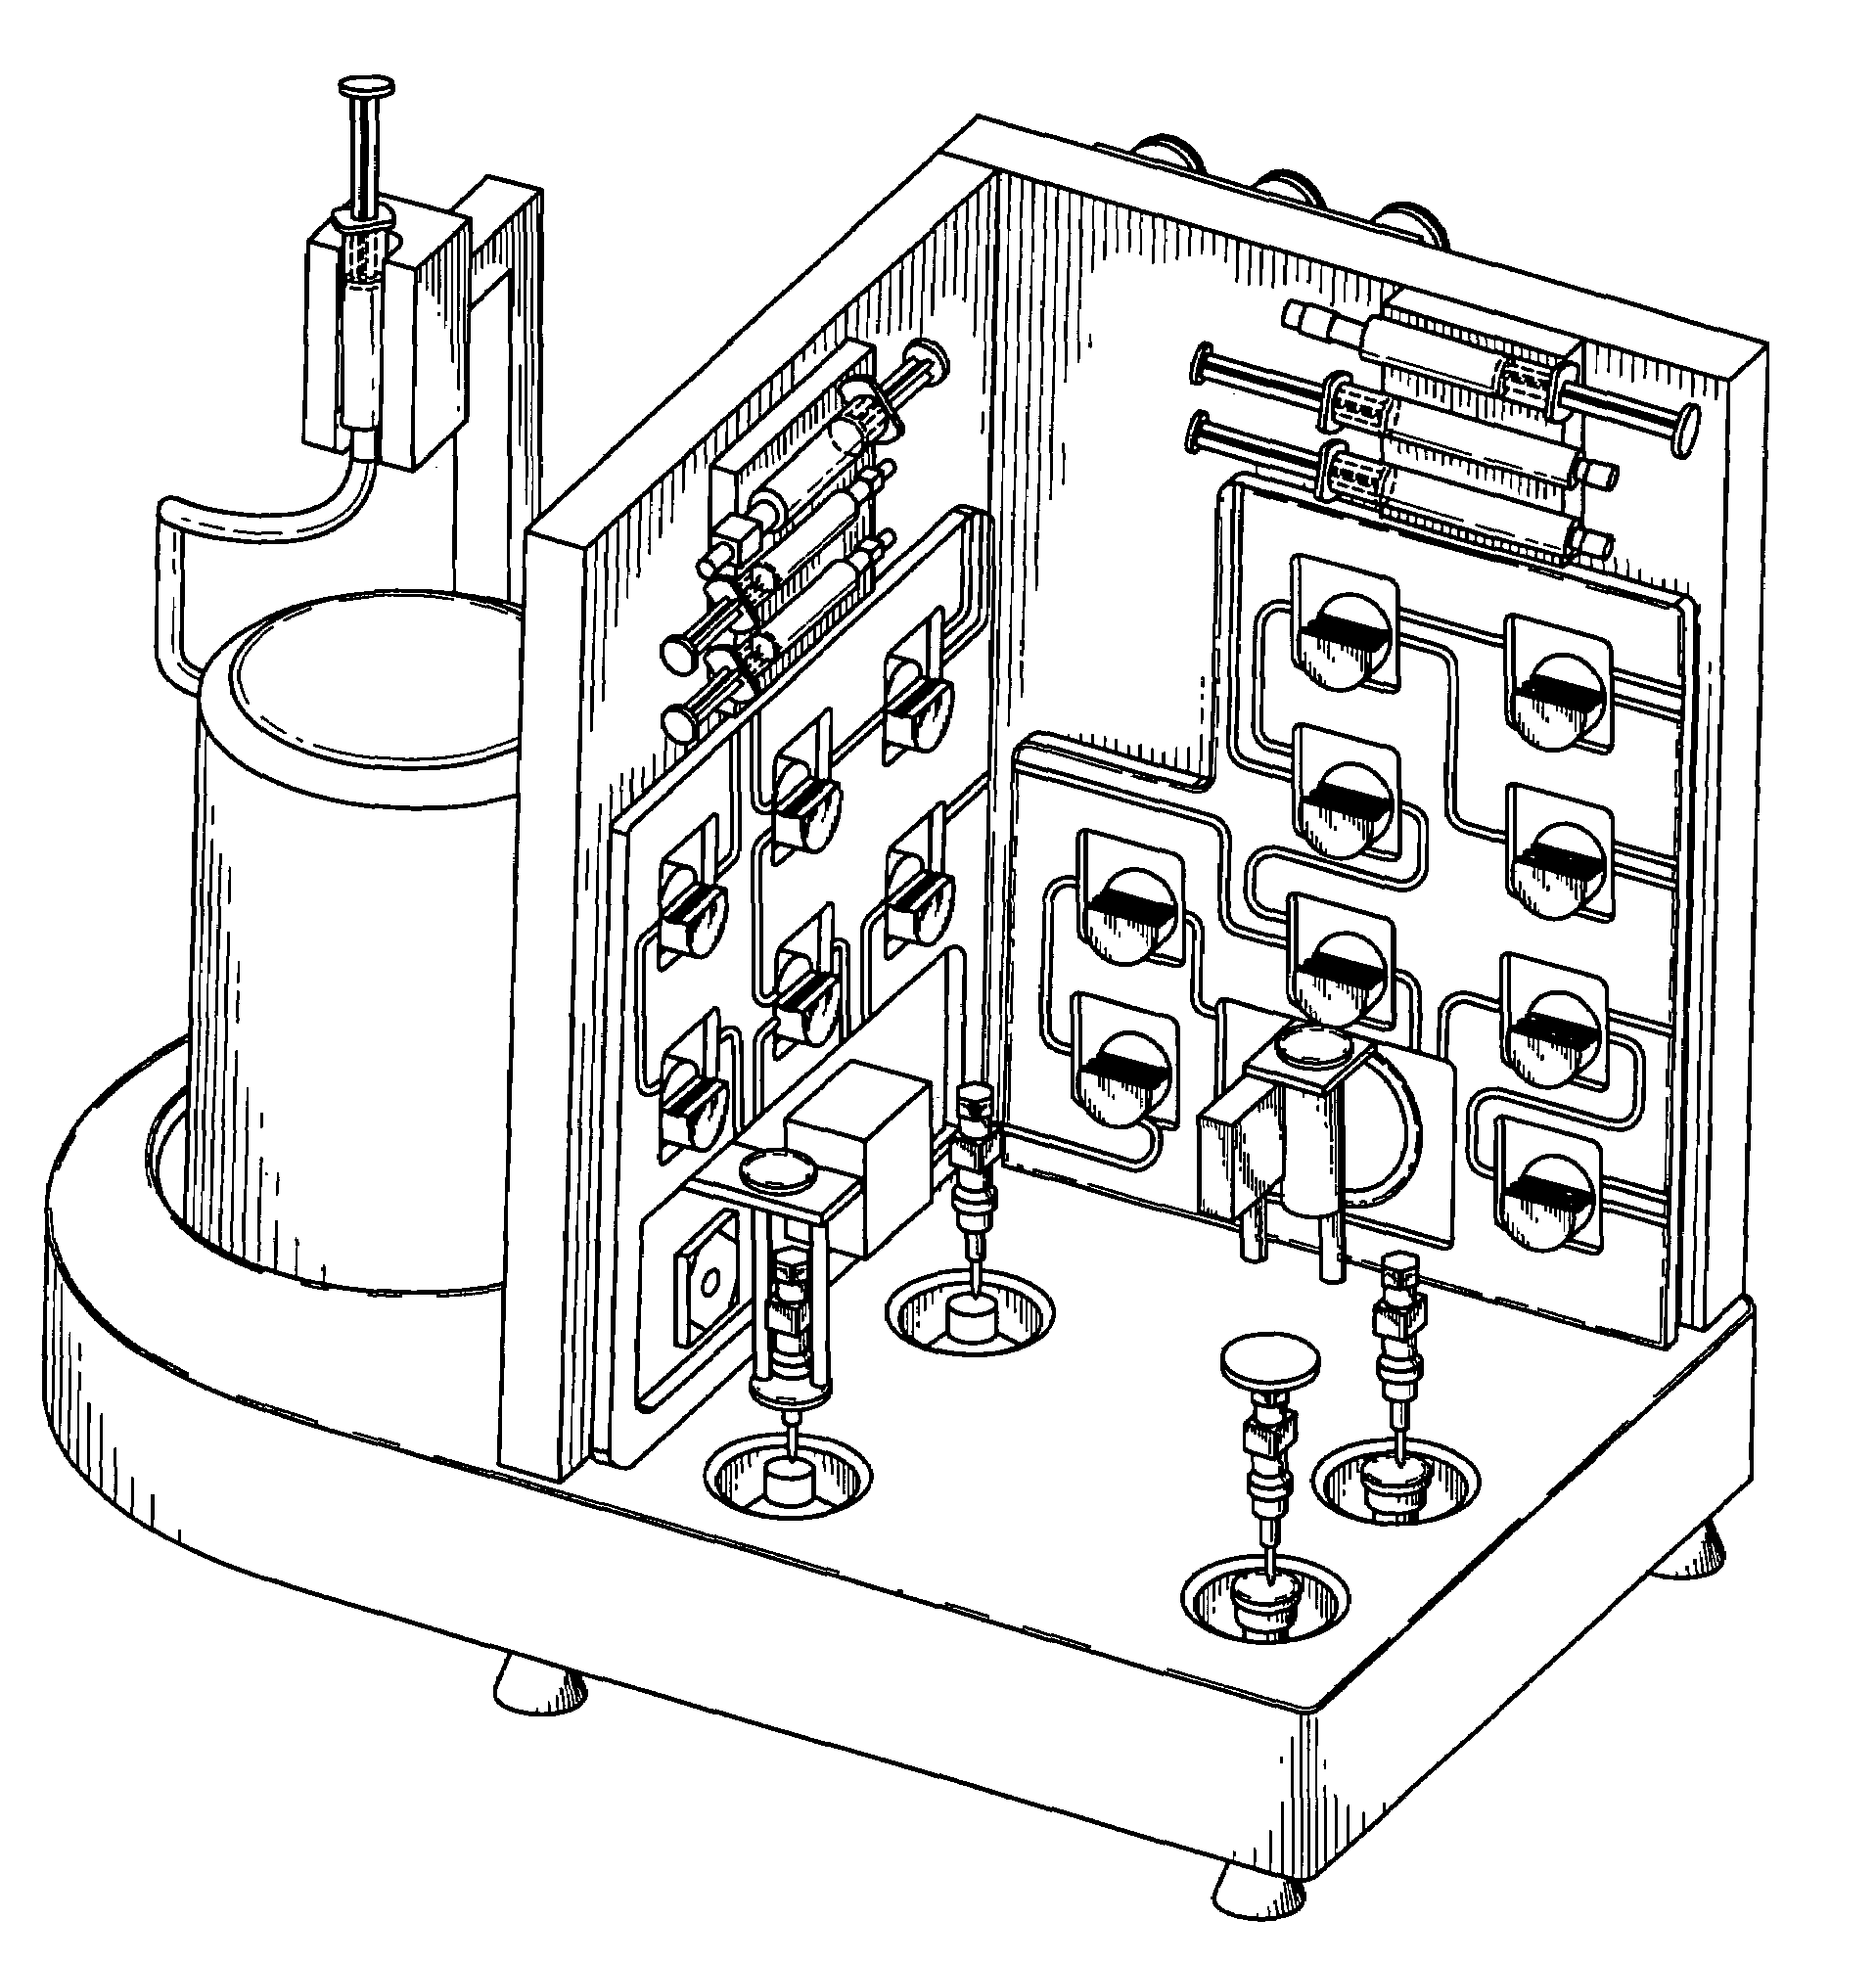 Automated system for formulating radiopharmaceuticals